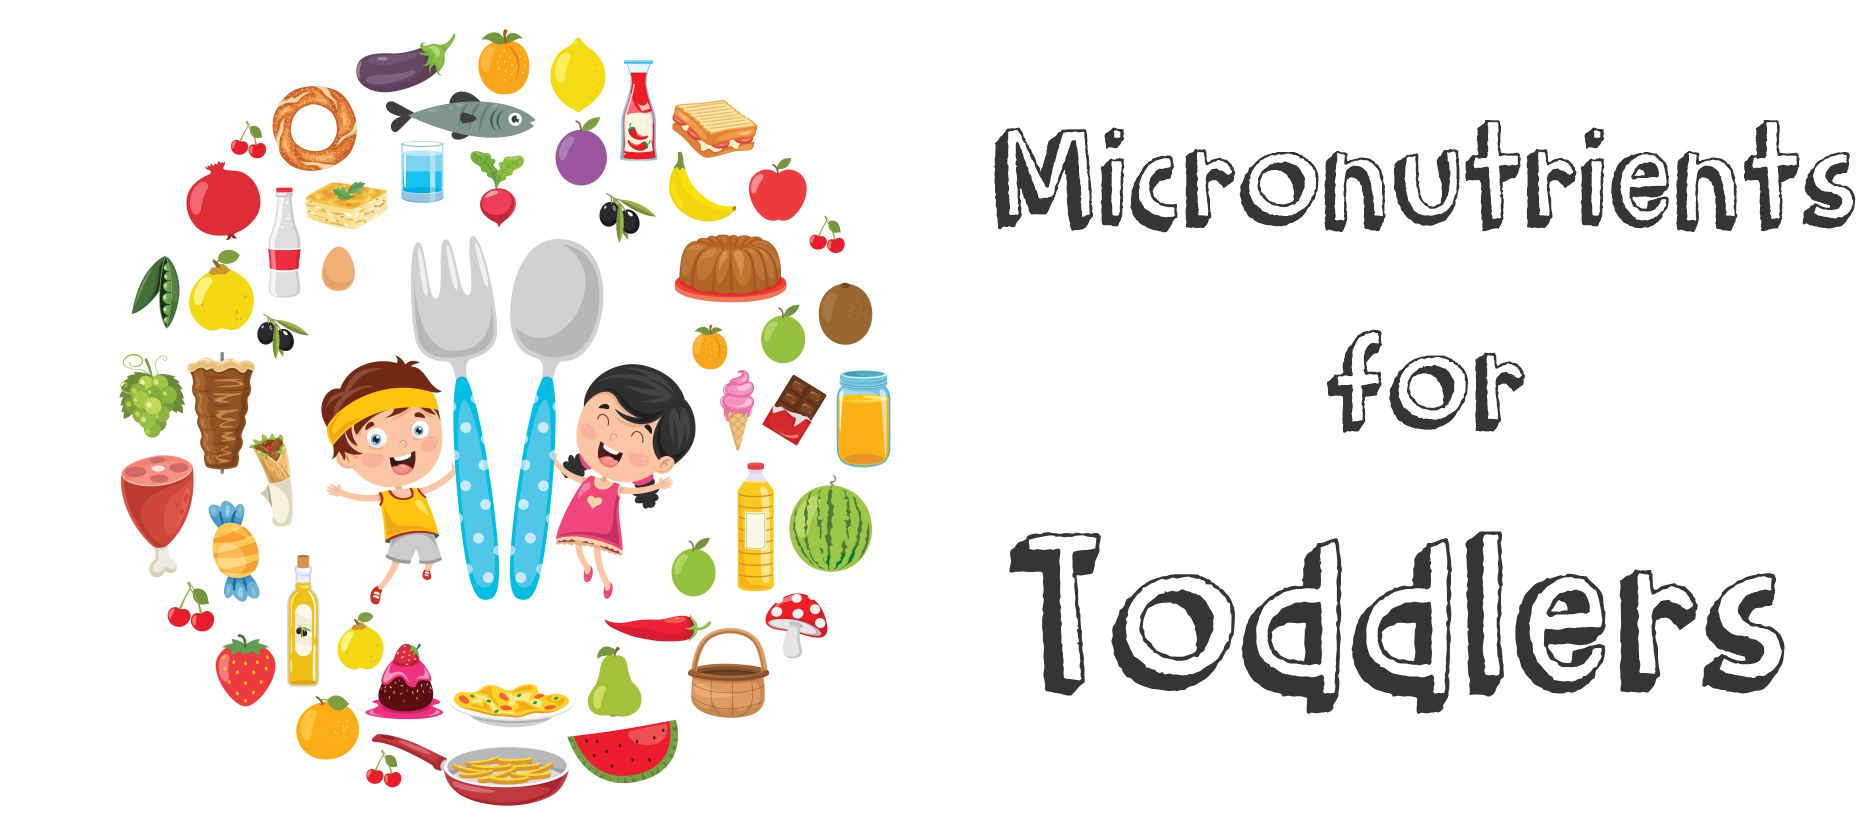 Micronutrients for Toddlers